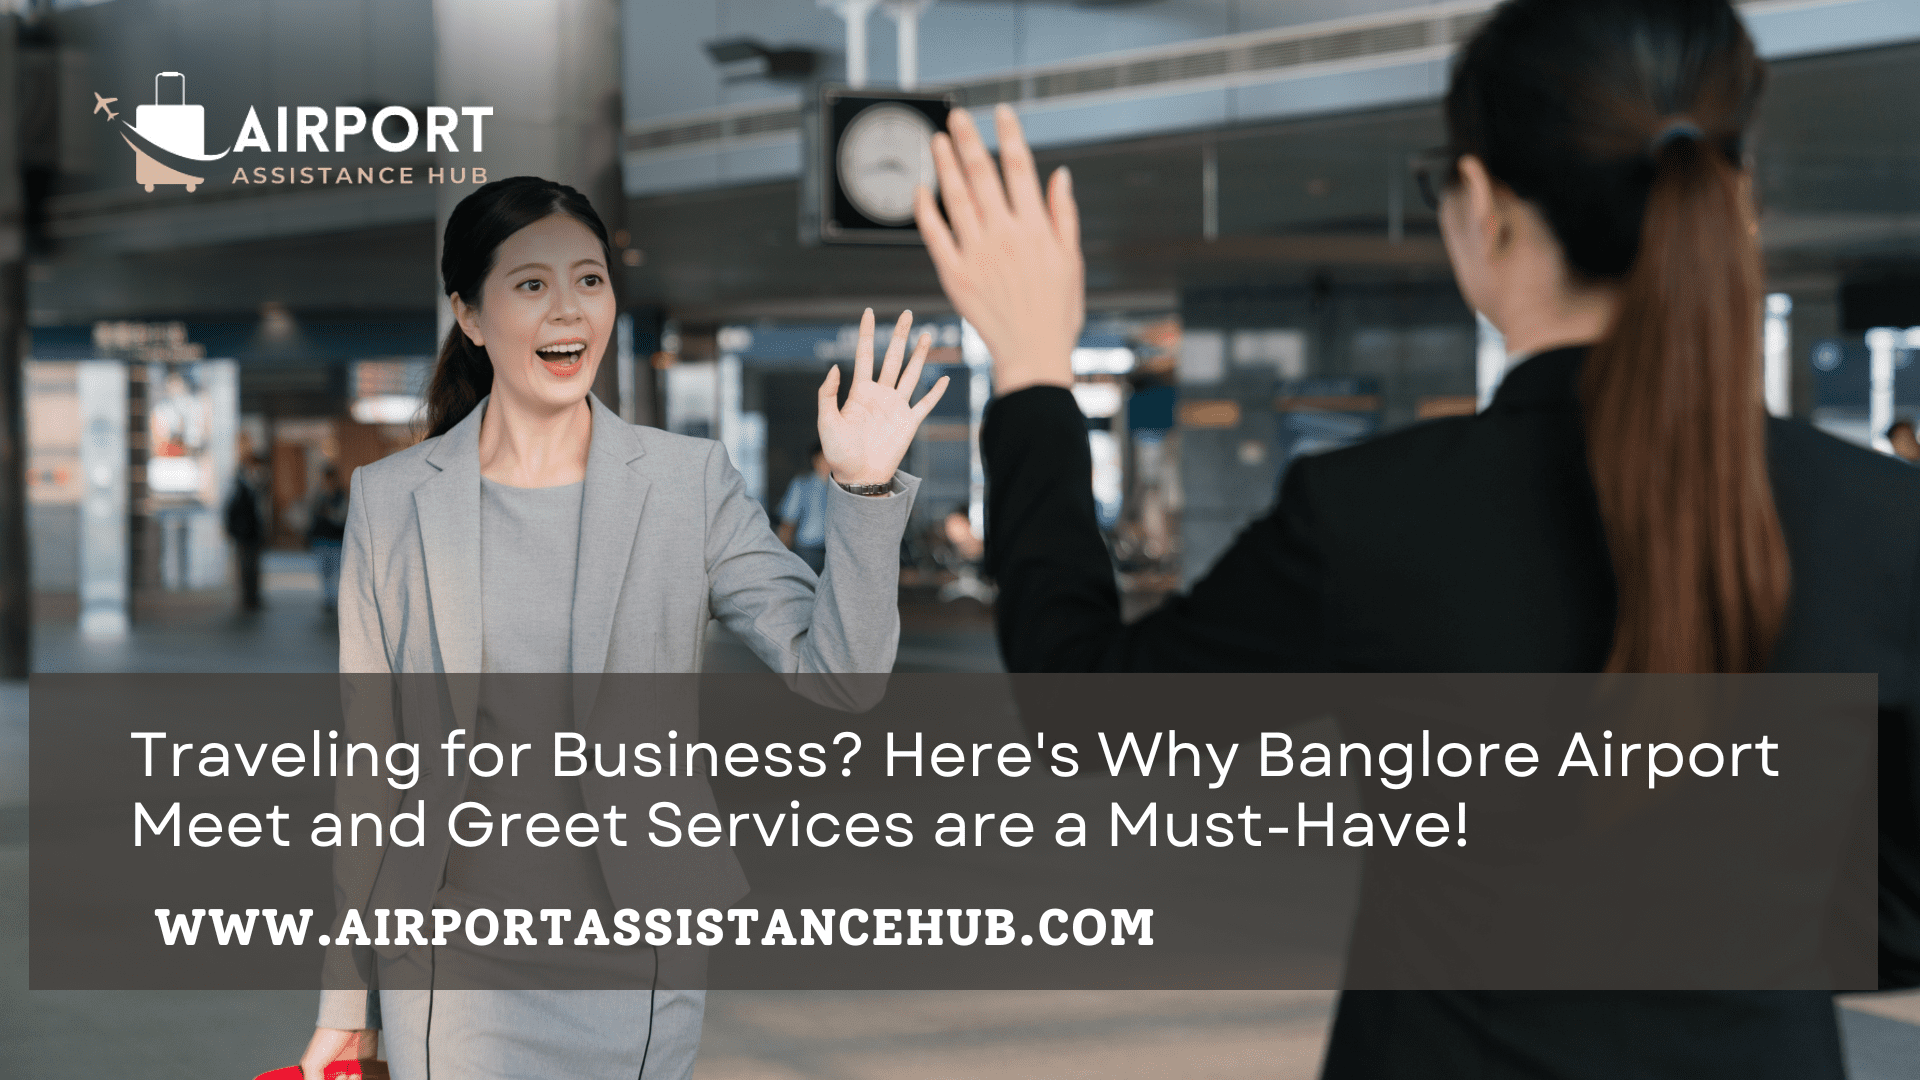 Traveling for Business? Here’s Why Banglore Airport Meet and Greet Services are a Must-Have!